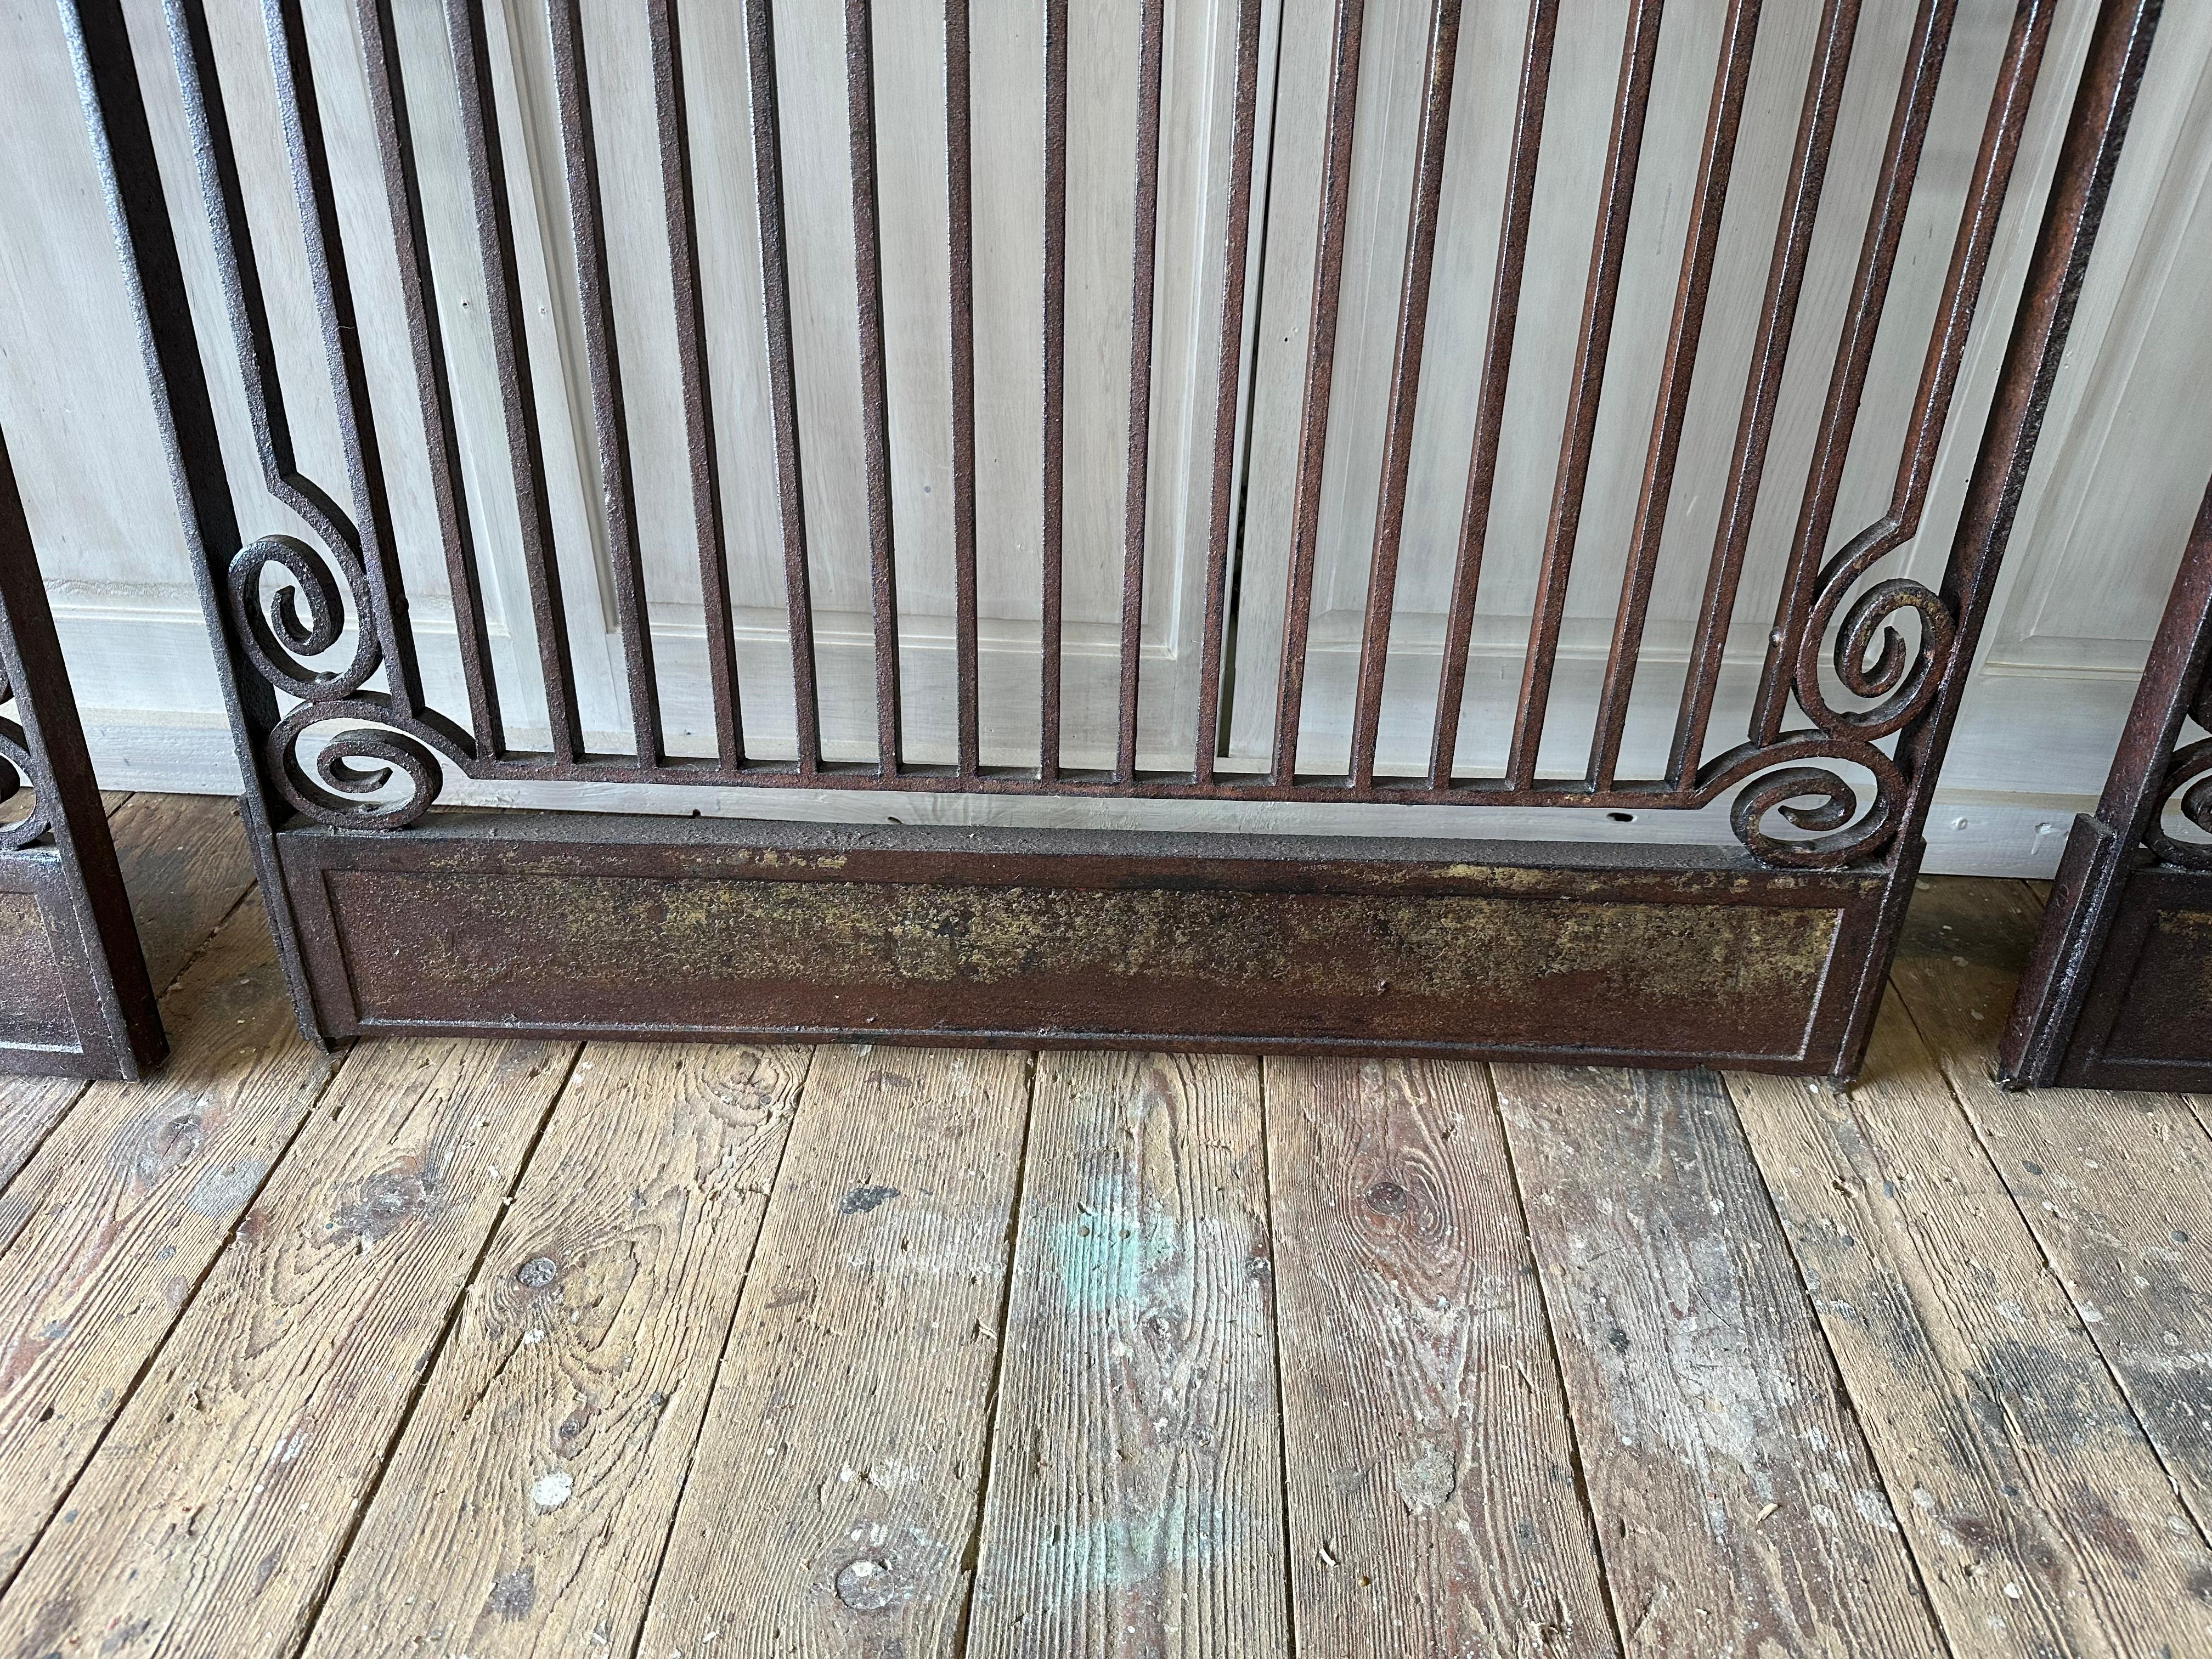 A Collection of 7 Antique Iron Gate or Fence Panels, Sold Singly For Sale 5